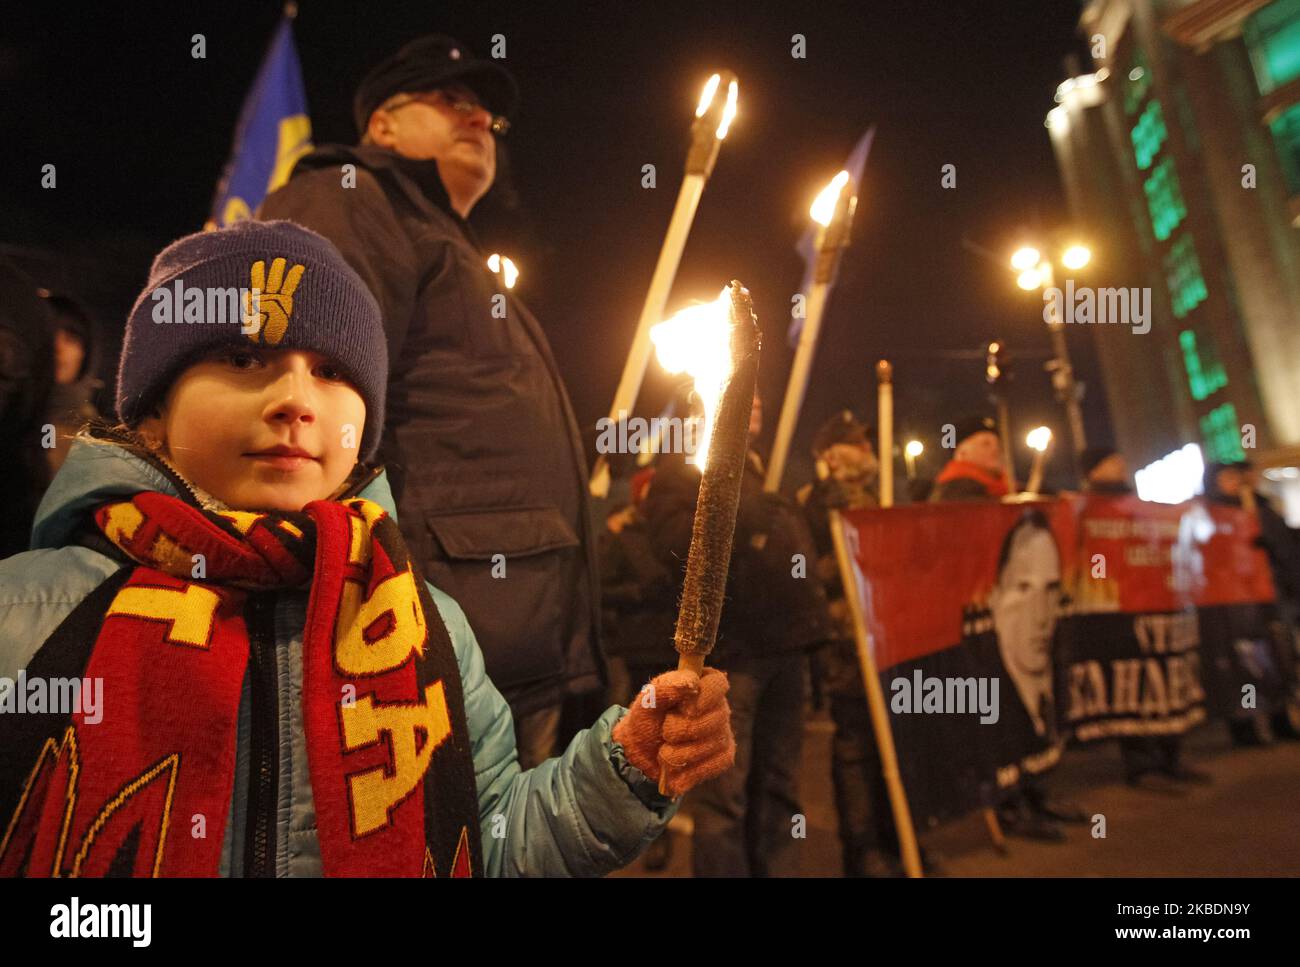 Ukrainians attend a torchlight procession dedicated to the 111th of Stepan Bandera birthday in center of Kyiv, Ukraine, on 1 January 2020. Members and supporters of 'Svoboda' ('Freedom') nationalistic party attended the torch march to mark leader and ideologist of Ukrainian national movement Stepan Bandera birthday. (Photo by STR/NurPhoto) Stock Photo